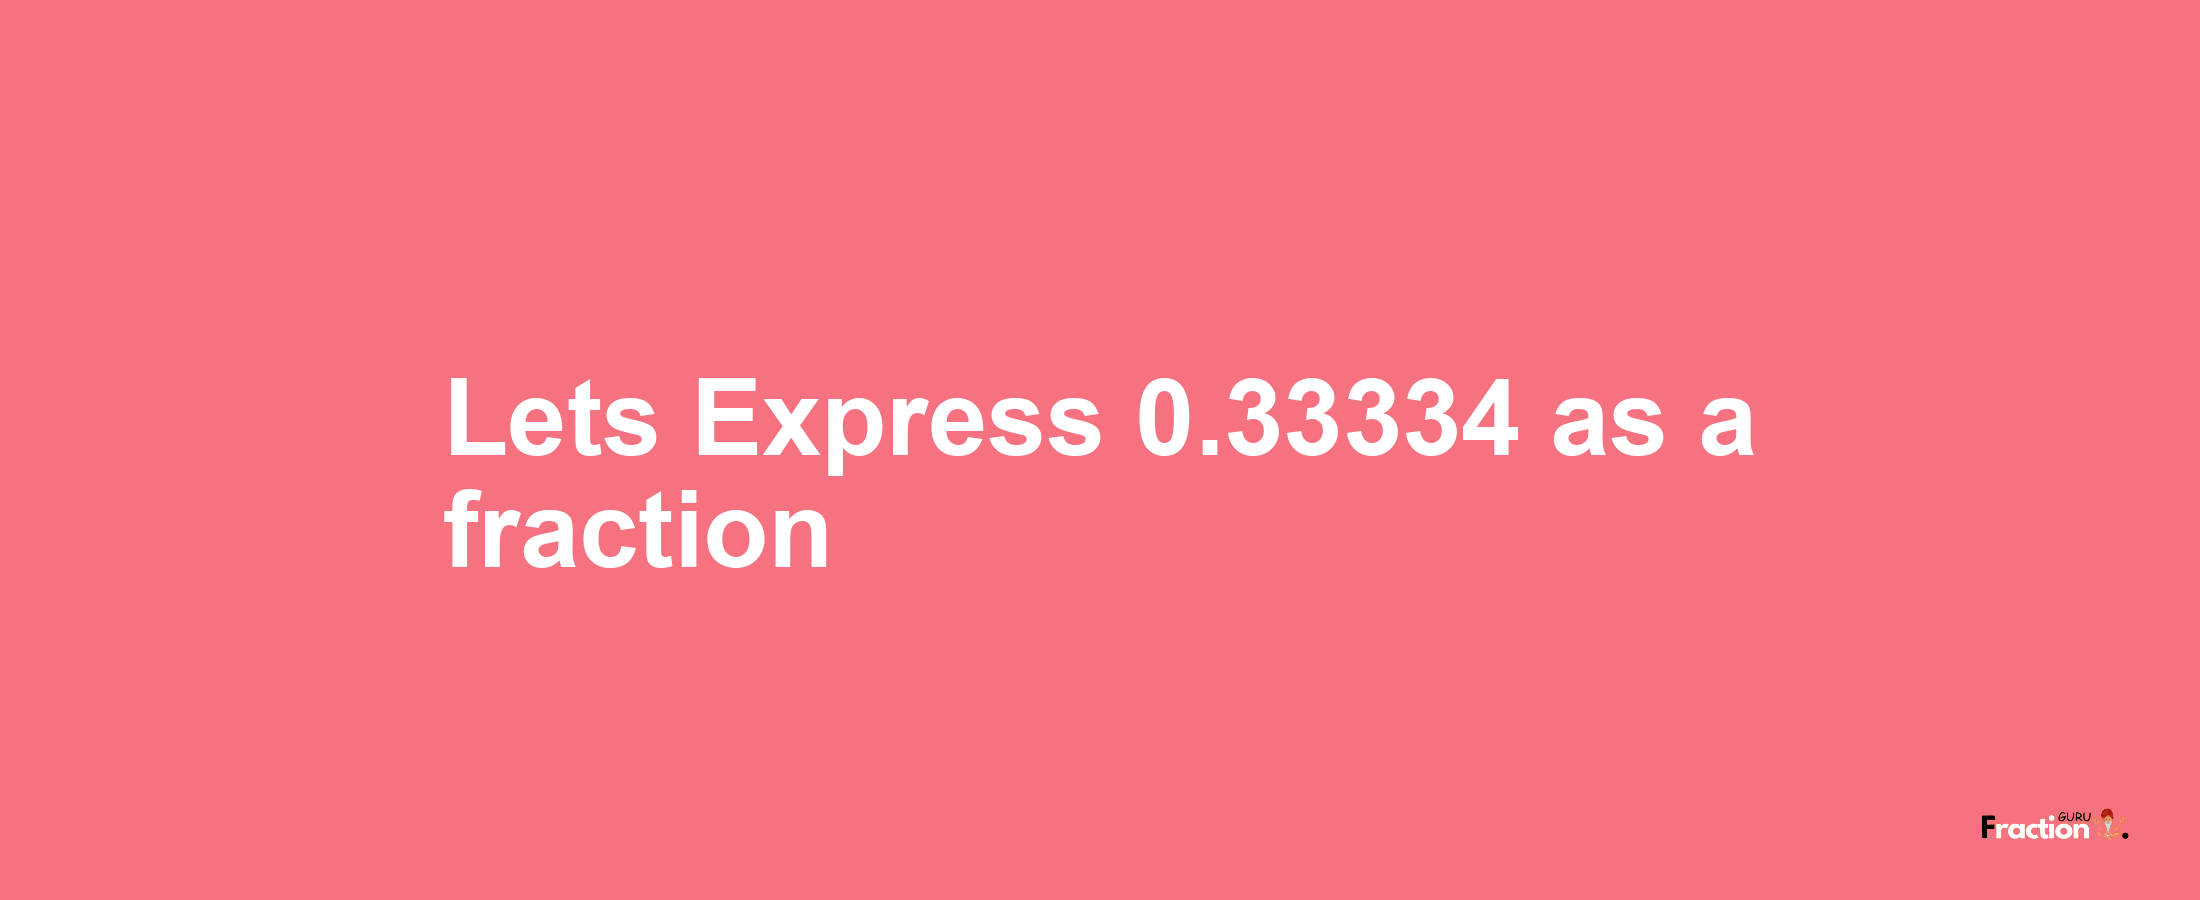 Lets Express 0.33334 as afraction